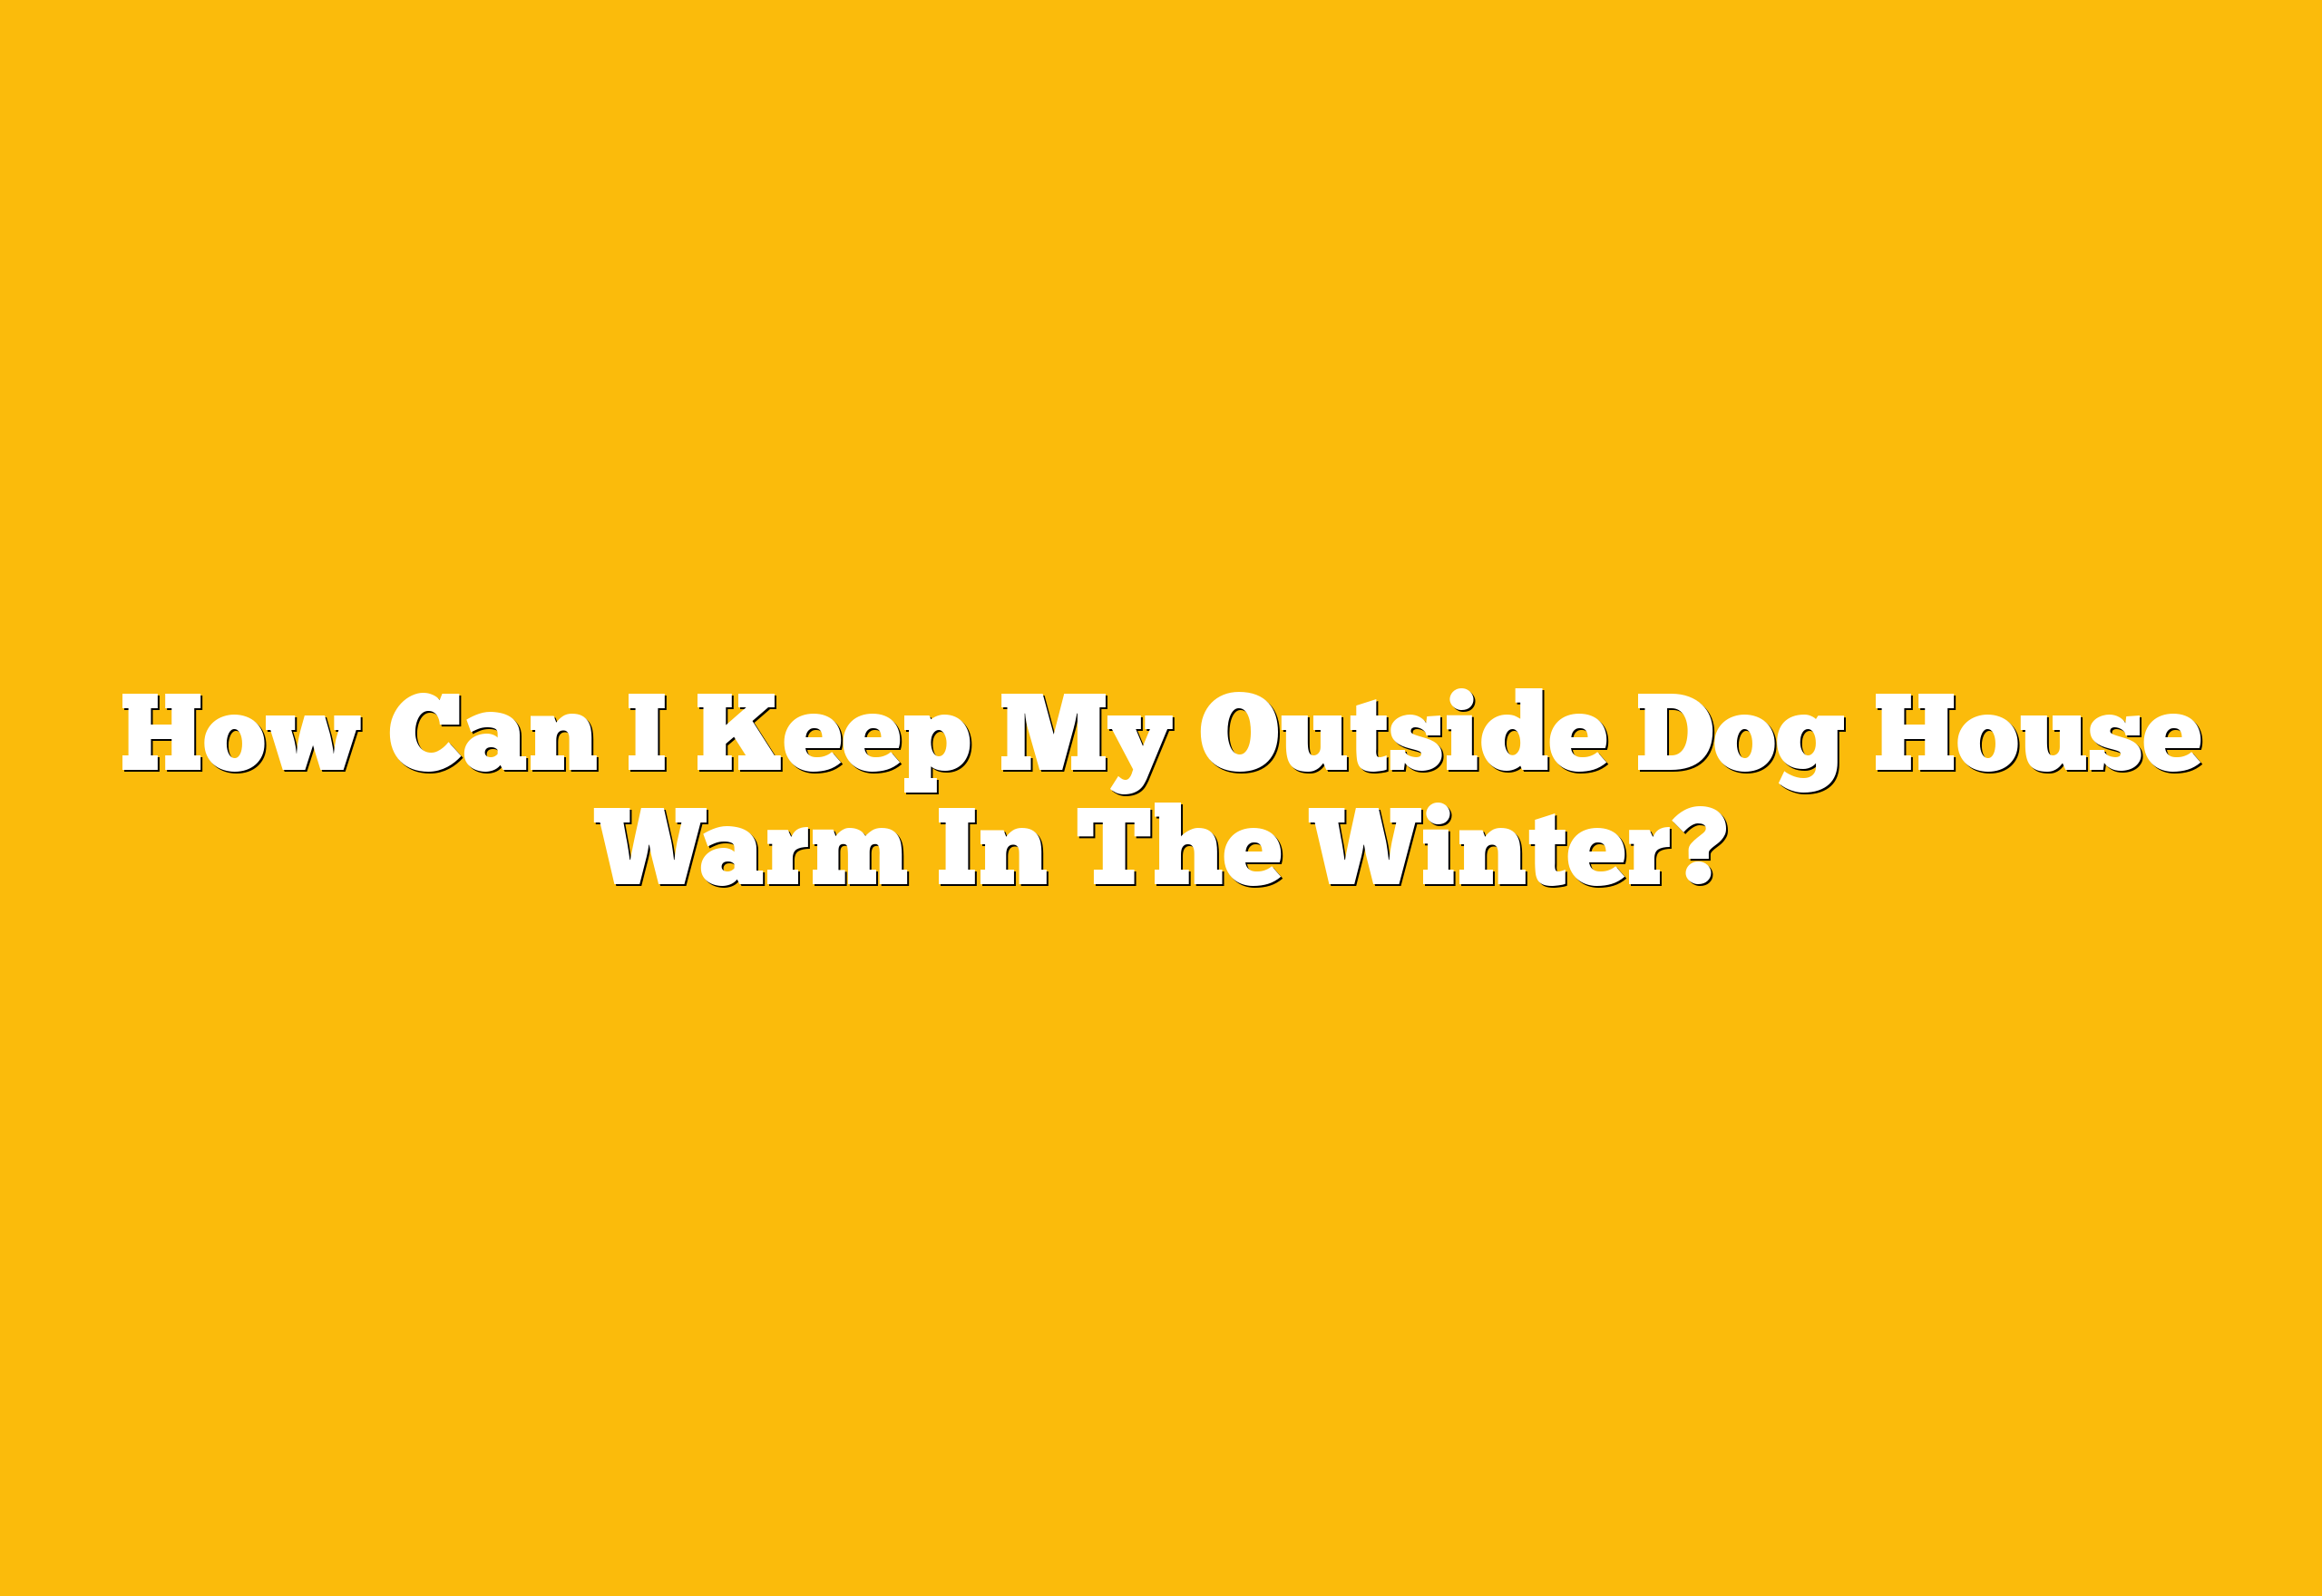 How Can I Keep My Outside Dog House Warm In The Winter?